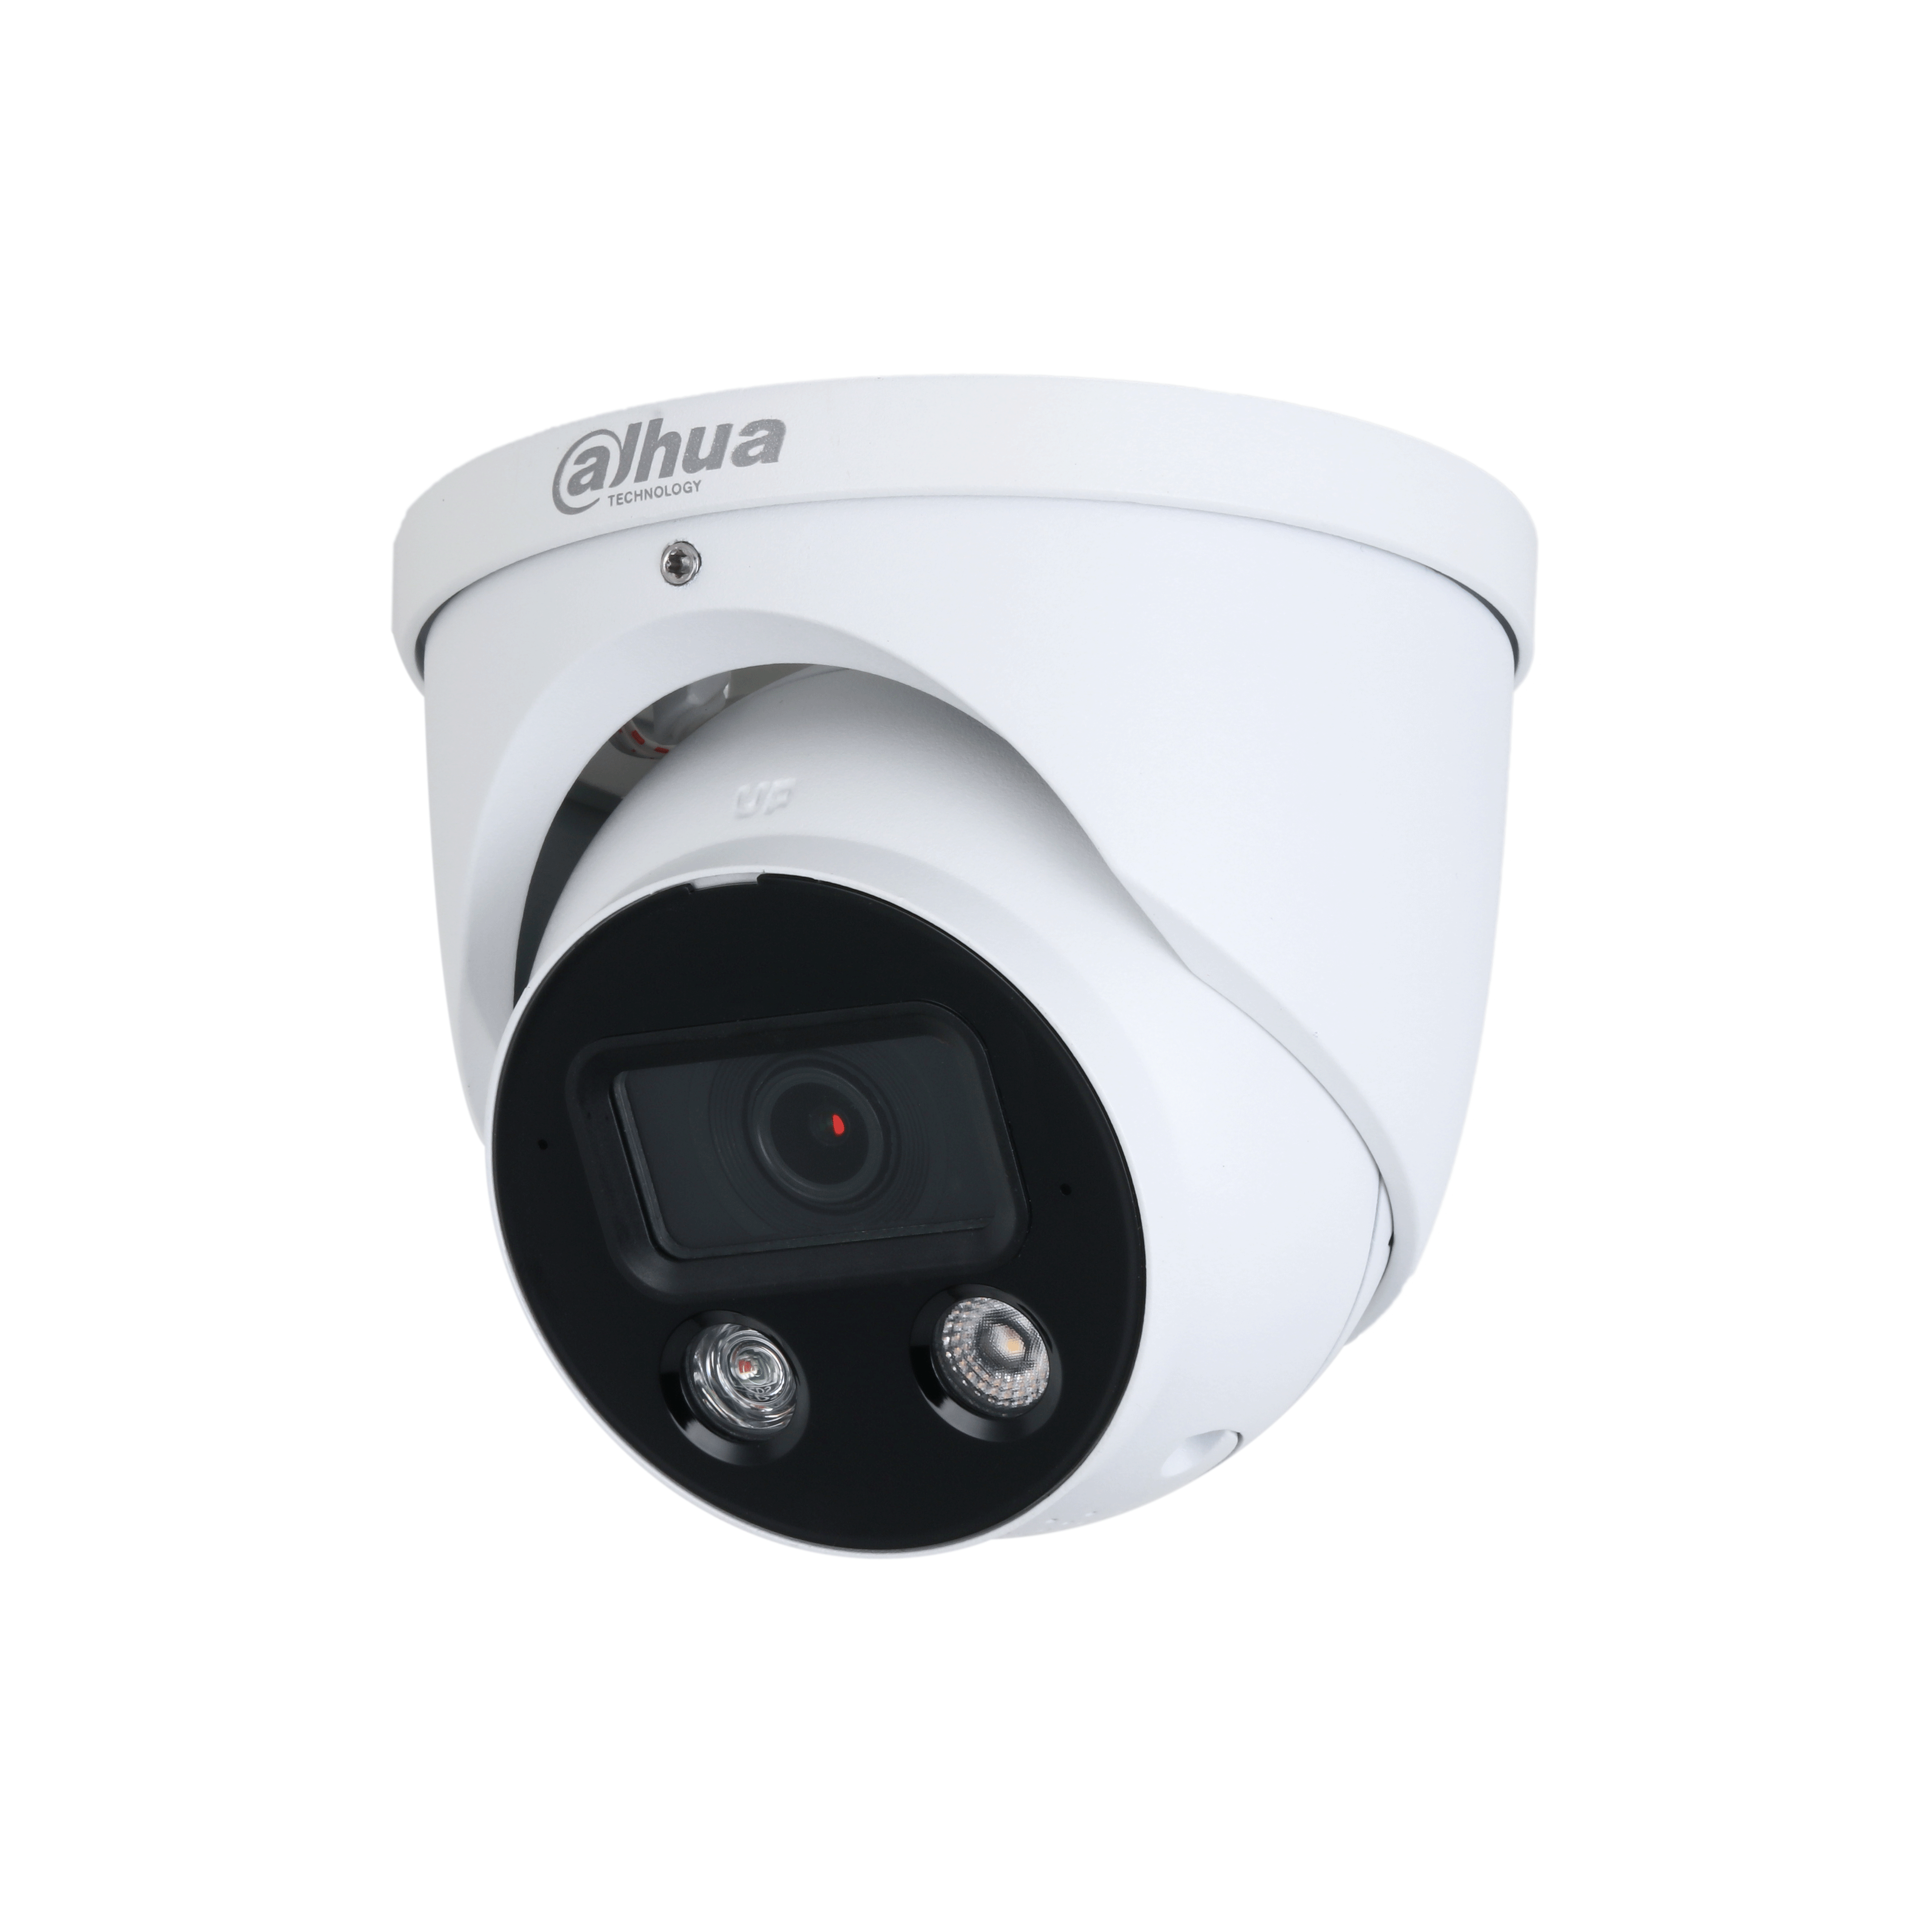 WIZSENSE SERIES IP CAMERA WHITE AI TIOC 8MP/4K H.264/4+/5/5+/ MJPEG TURRET 120 WDR METAL 2.7-13.5MM MOTORISED LENS 5X ZOOM FULL COLOUR IR+WHITE LED 50M POE IP67 BUILT IN MIC AUDIO IN AUDIO OUT 1 x ALARM IN 1 x ALARM OUT SUPPORT UP TO 256GB SD 12VDC